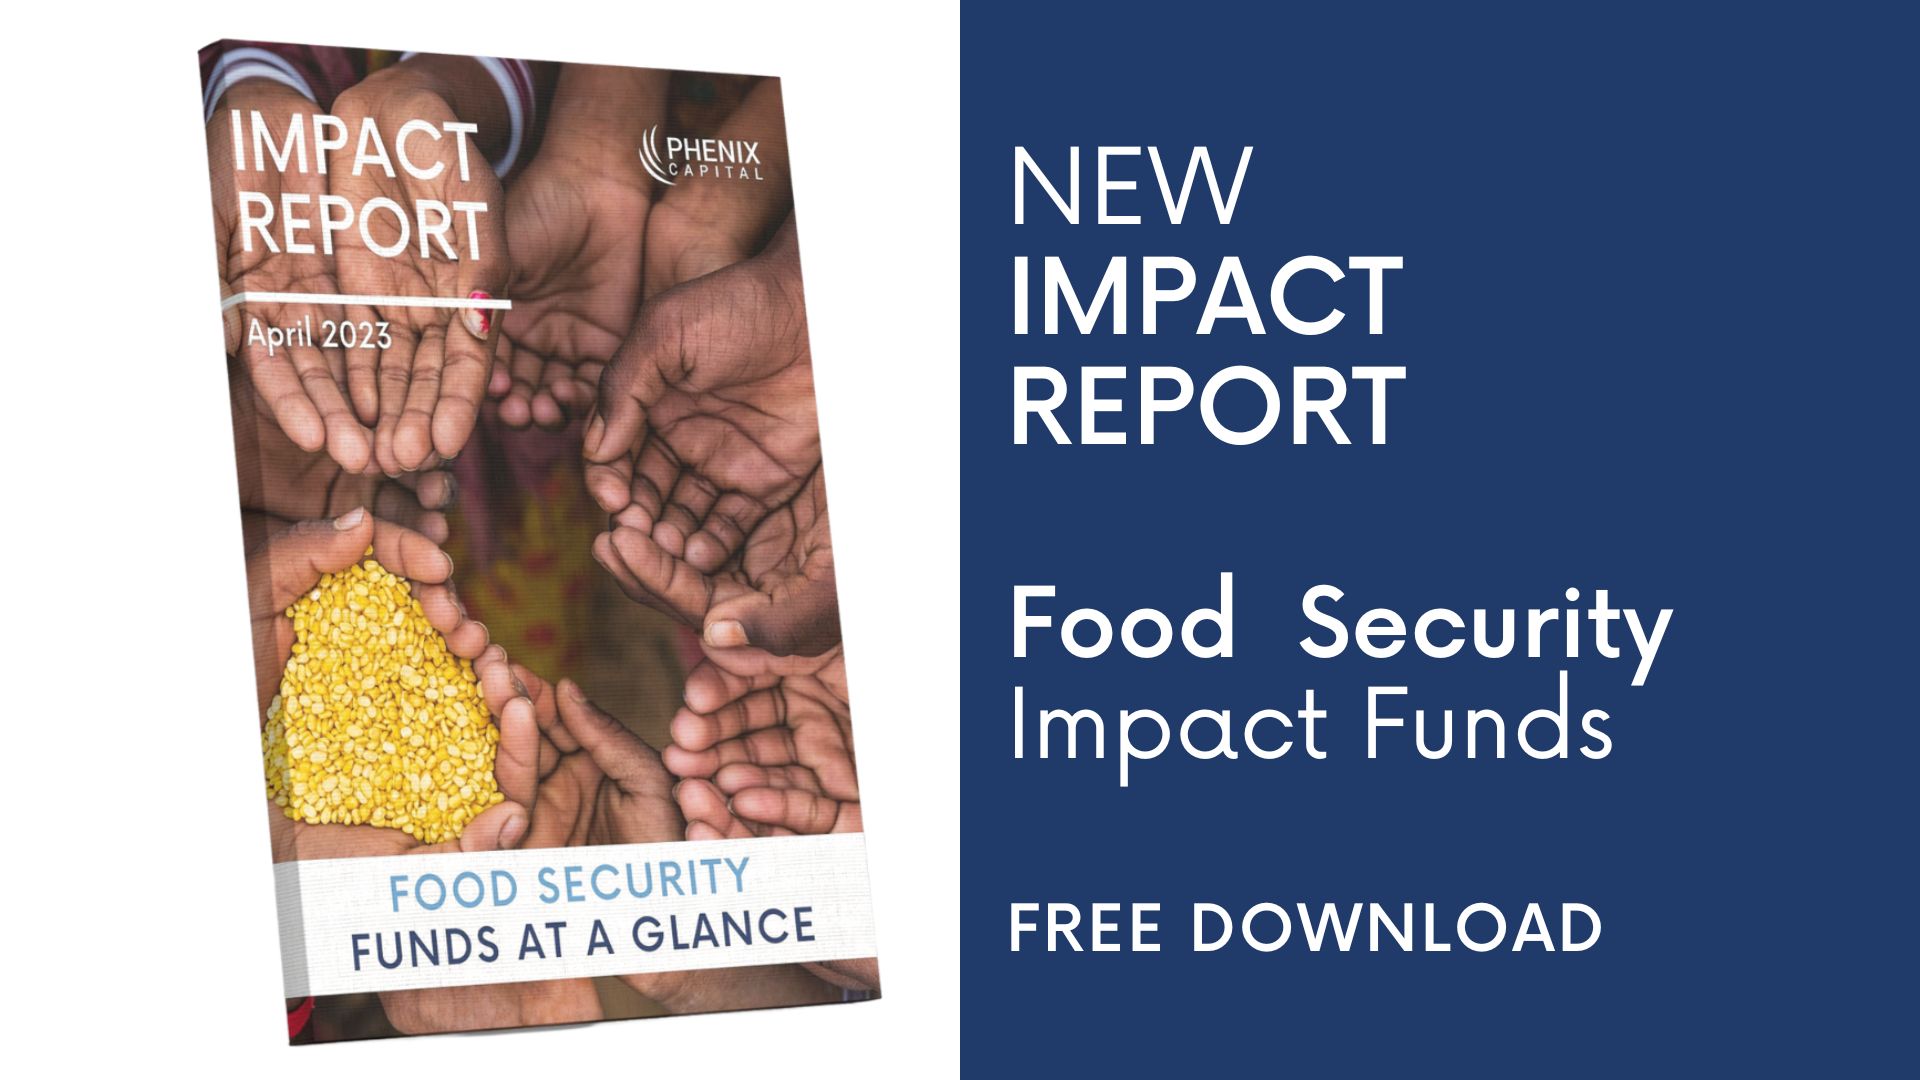 Phenix Capital Group has launched its new Impact Report bringing data on Food Security Funds. The report includes data from commingled impact funds that target the following six impact themes: Access to Food, Foodtech, Smallholder Farming, Sustainable Agriculture & Farming, Sustainable Aquaculture, and Small Scale Fisheries.